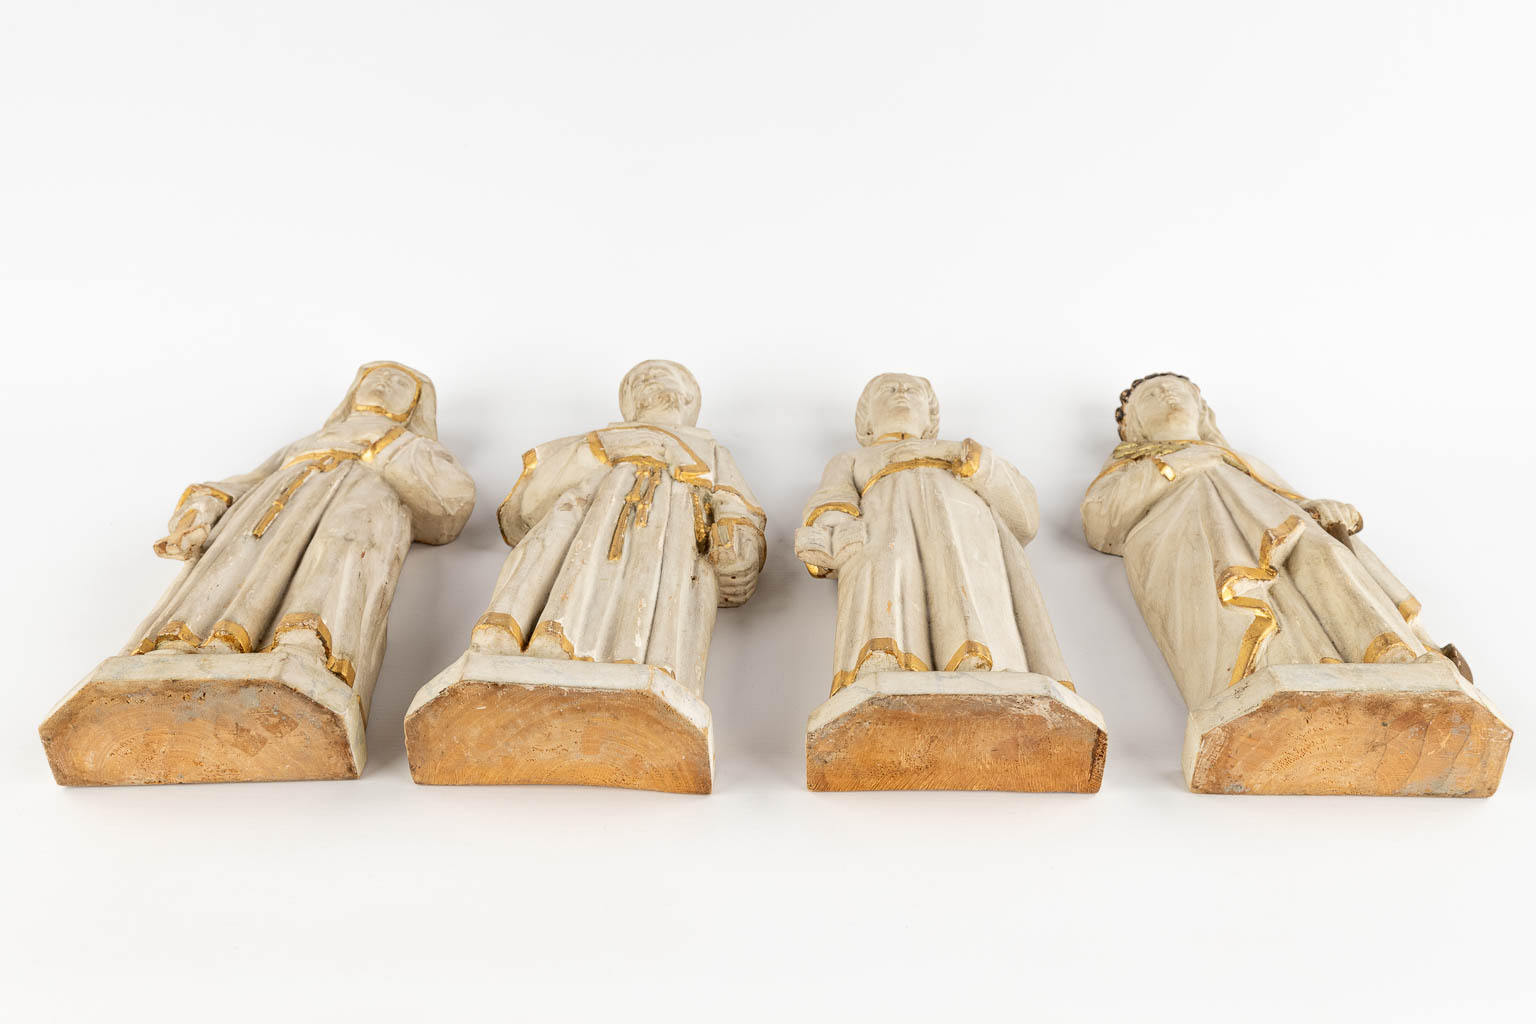 Four wood sculptured Holy figurines, 19th C. (H:39 cm)